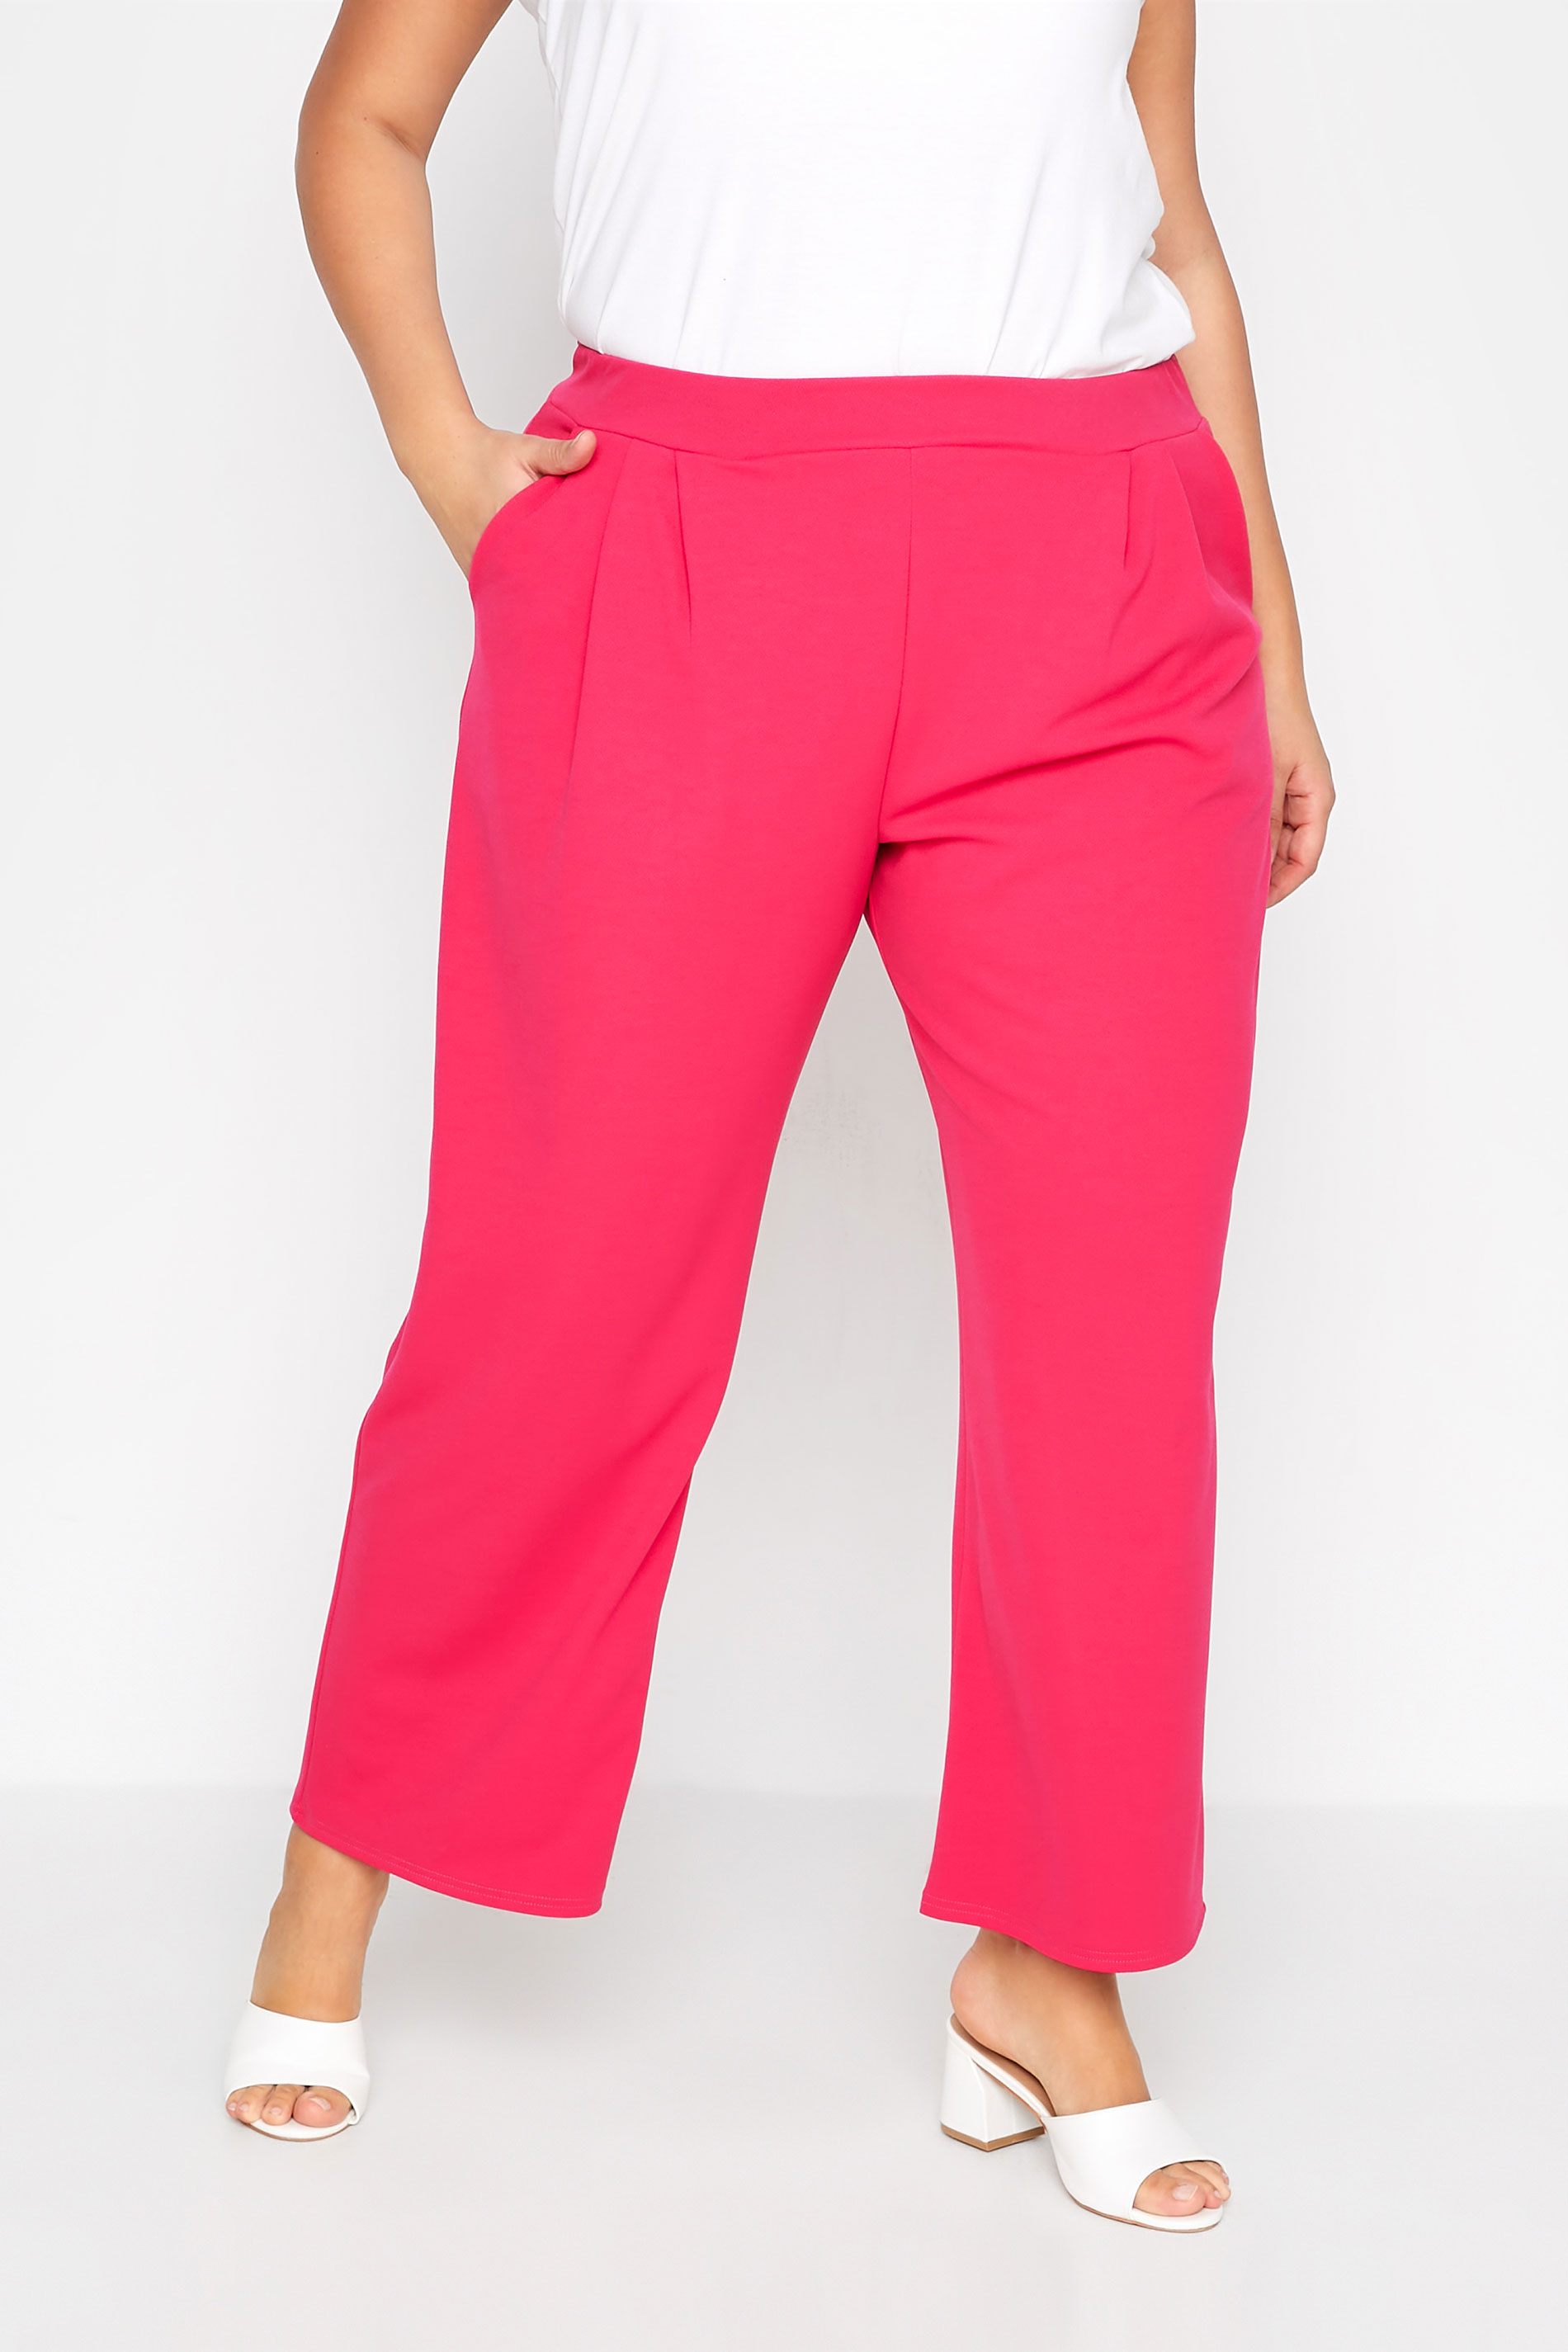 Grande taille  Pantalons Grande taille  Pantalons Larges, Wide Leg | LIMITED COLLECTION - Pantalon Rose Flashy Wide Leg - VG78783